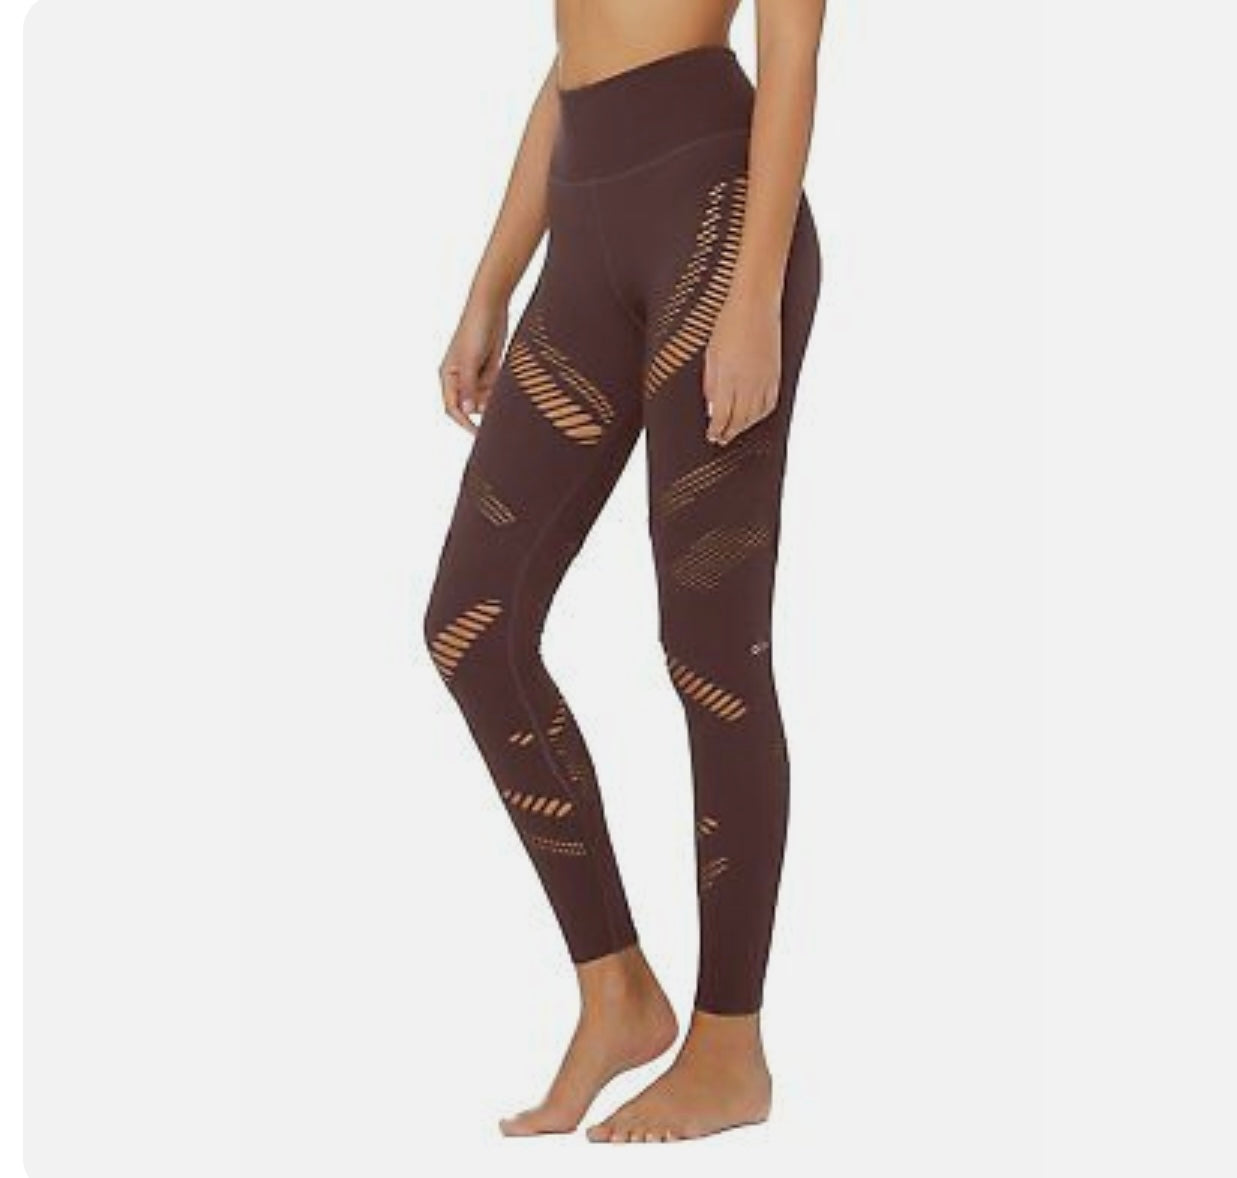 Alo Yoga Women's Idol Legging, Jungle Glossy, S: Buy Online at Best Price  in Egypt - Souq is now